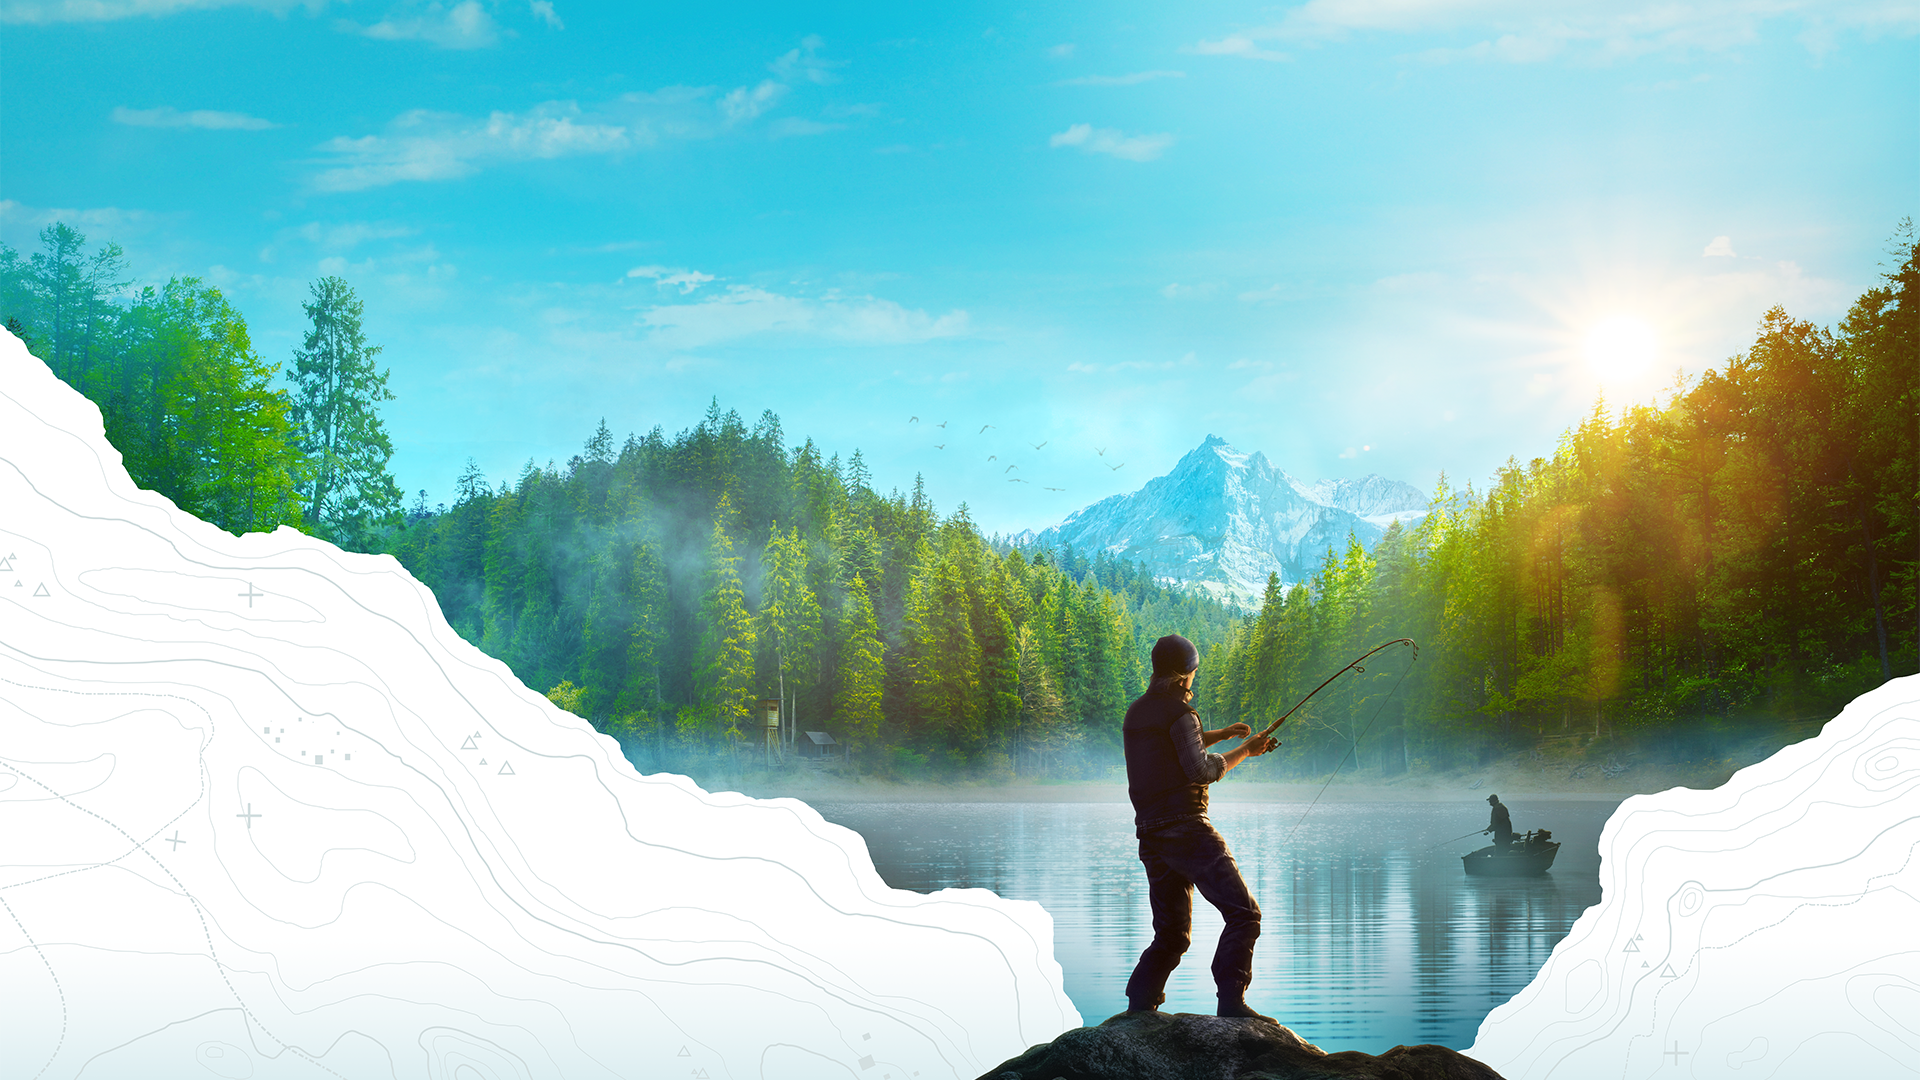 Key art for Call of the Wild: The Angler without the logo.